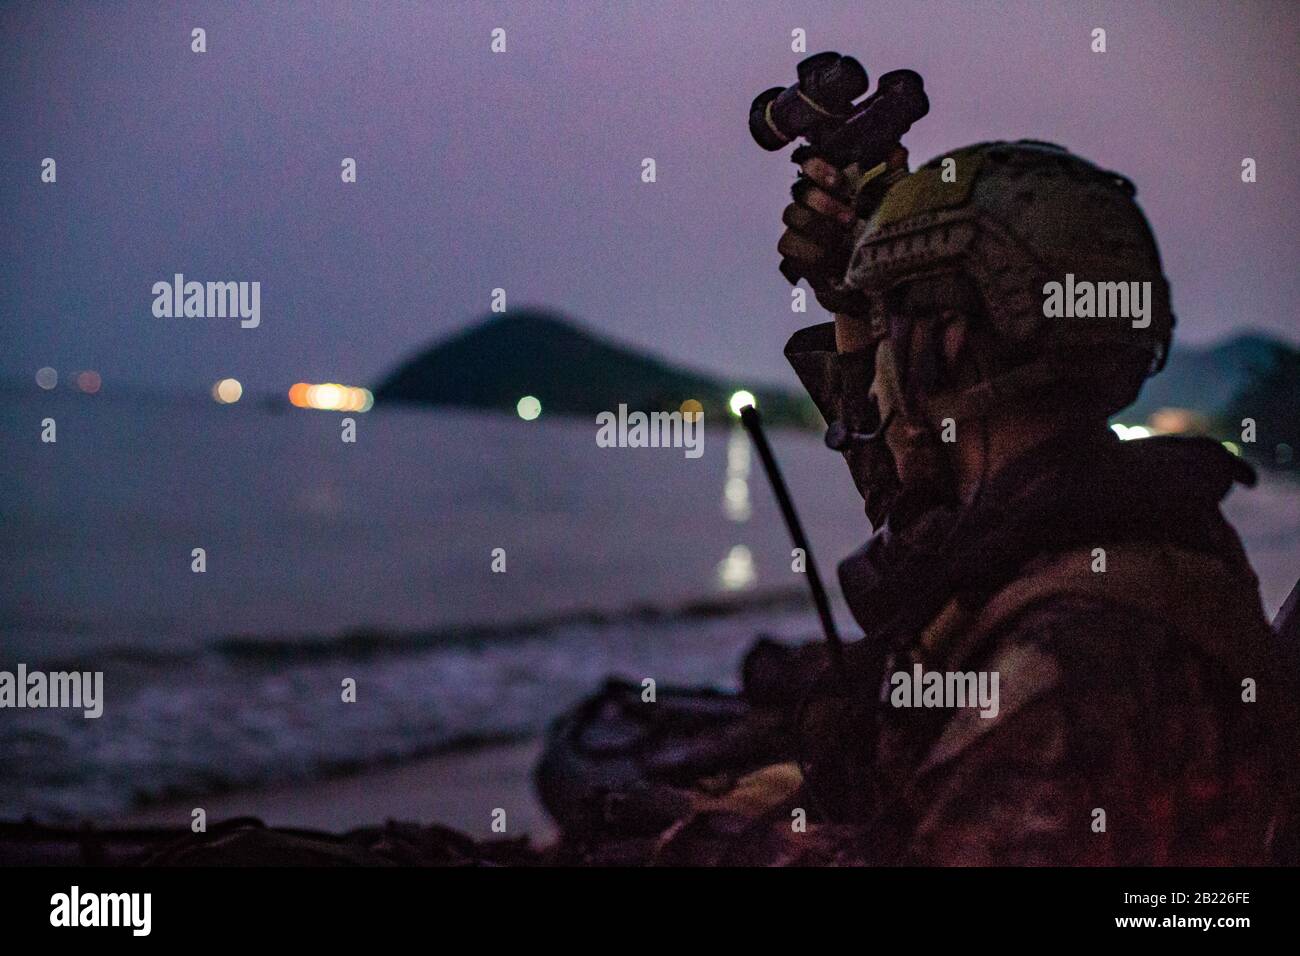 A U.S. Marine with the 31st Marine Expeditionary Unit’s Maritime Raid Force prepares his gear prior to a bilateral reconnaissance and surveillance insert with Royal Thai Marines at Hat Yao Beach, Kingdom of Thailand, Feb. 26, 2020, as part of Cobra Gold 2020. Exercise Cobra Gold 20, in its 39th iteration, is designed to advance regional security and ensure effective responses to regional crises by bringing together multinational forces to address shared goals and security commitments in the Indo-Pacific region. (U.S. Marine Corps photo by Cpl. Isaac Cantrell) Stock Photo